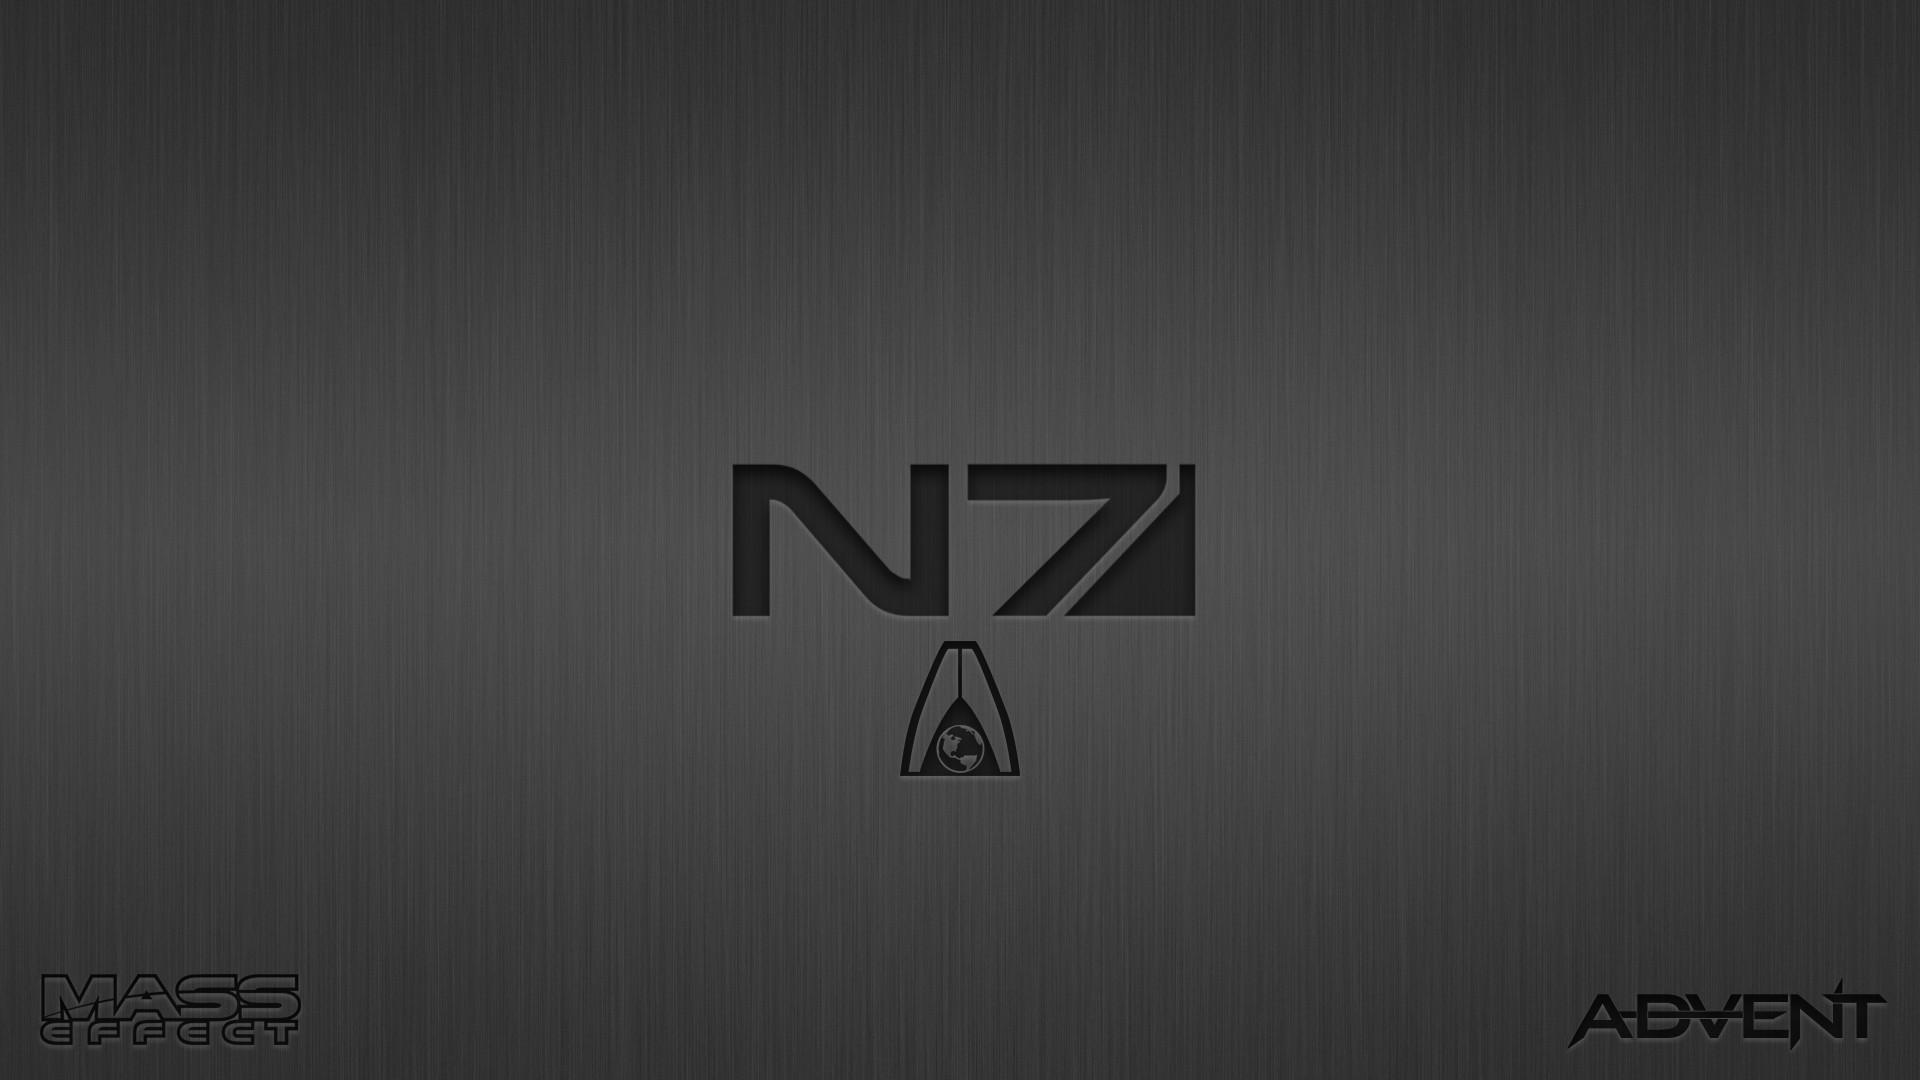 1920x1080 ... N7Day Wallpaper - Mass Effect - Advent Designs by AdventDesigns